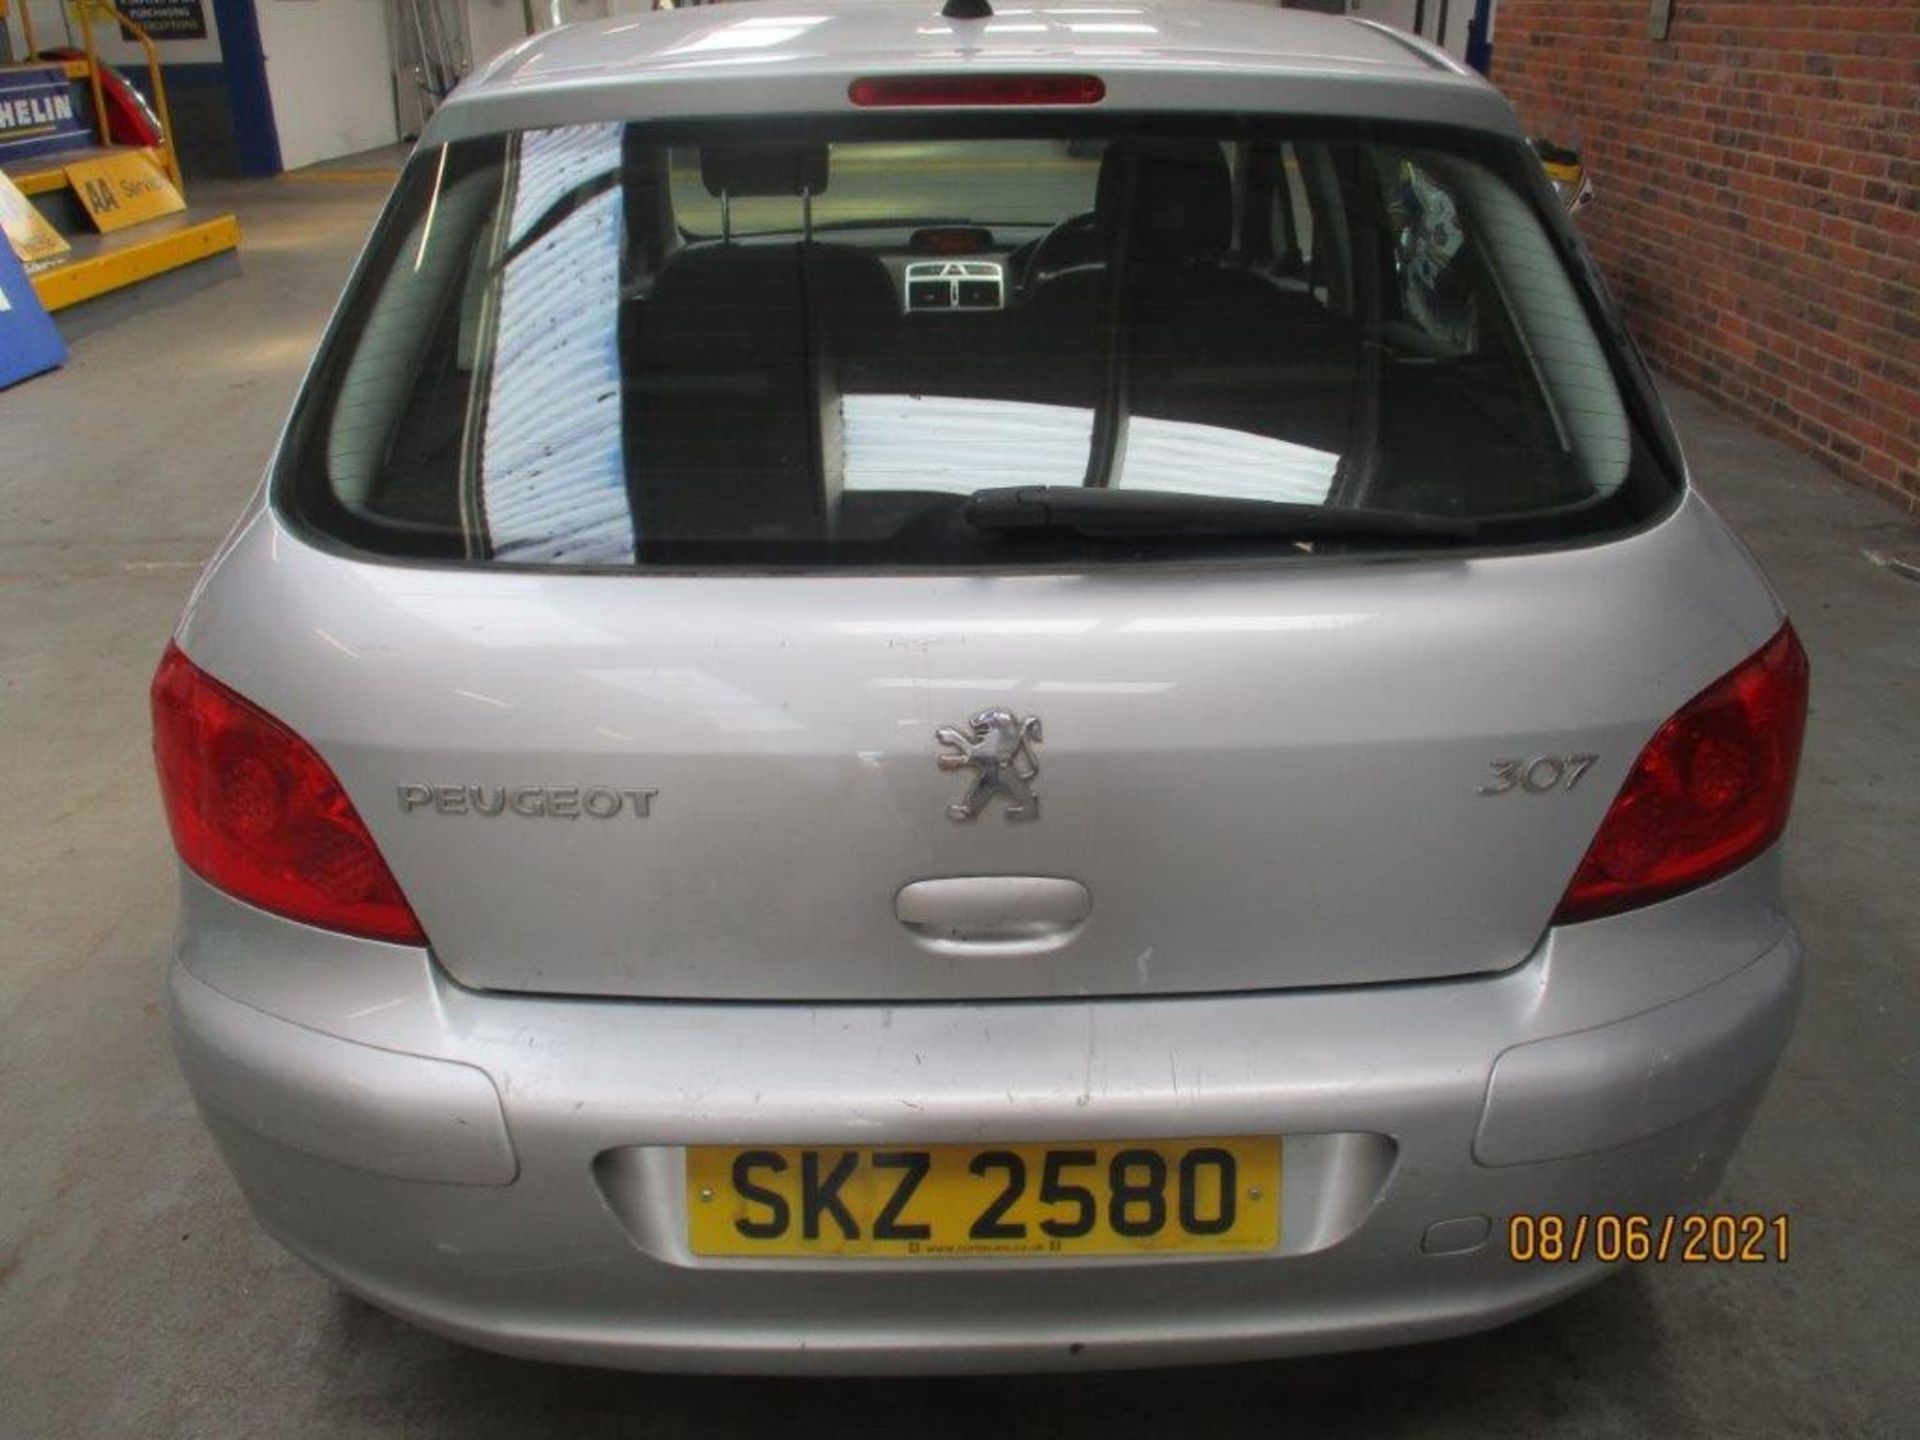 56 06 Peugeot 307 S - Image 6 of 21